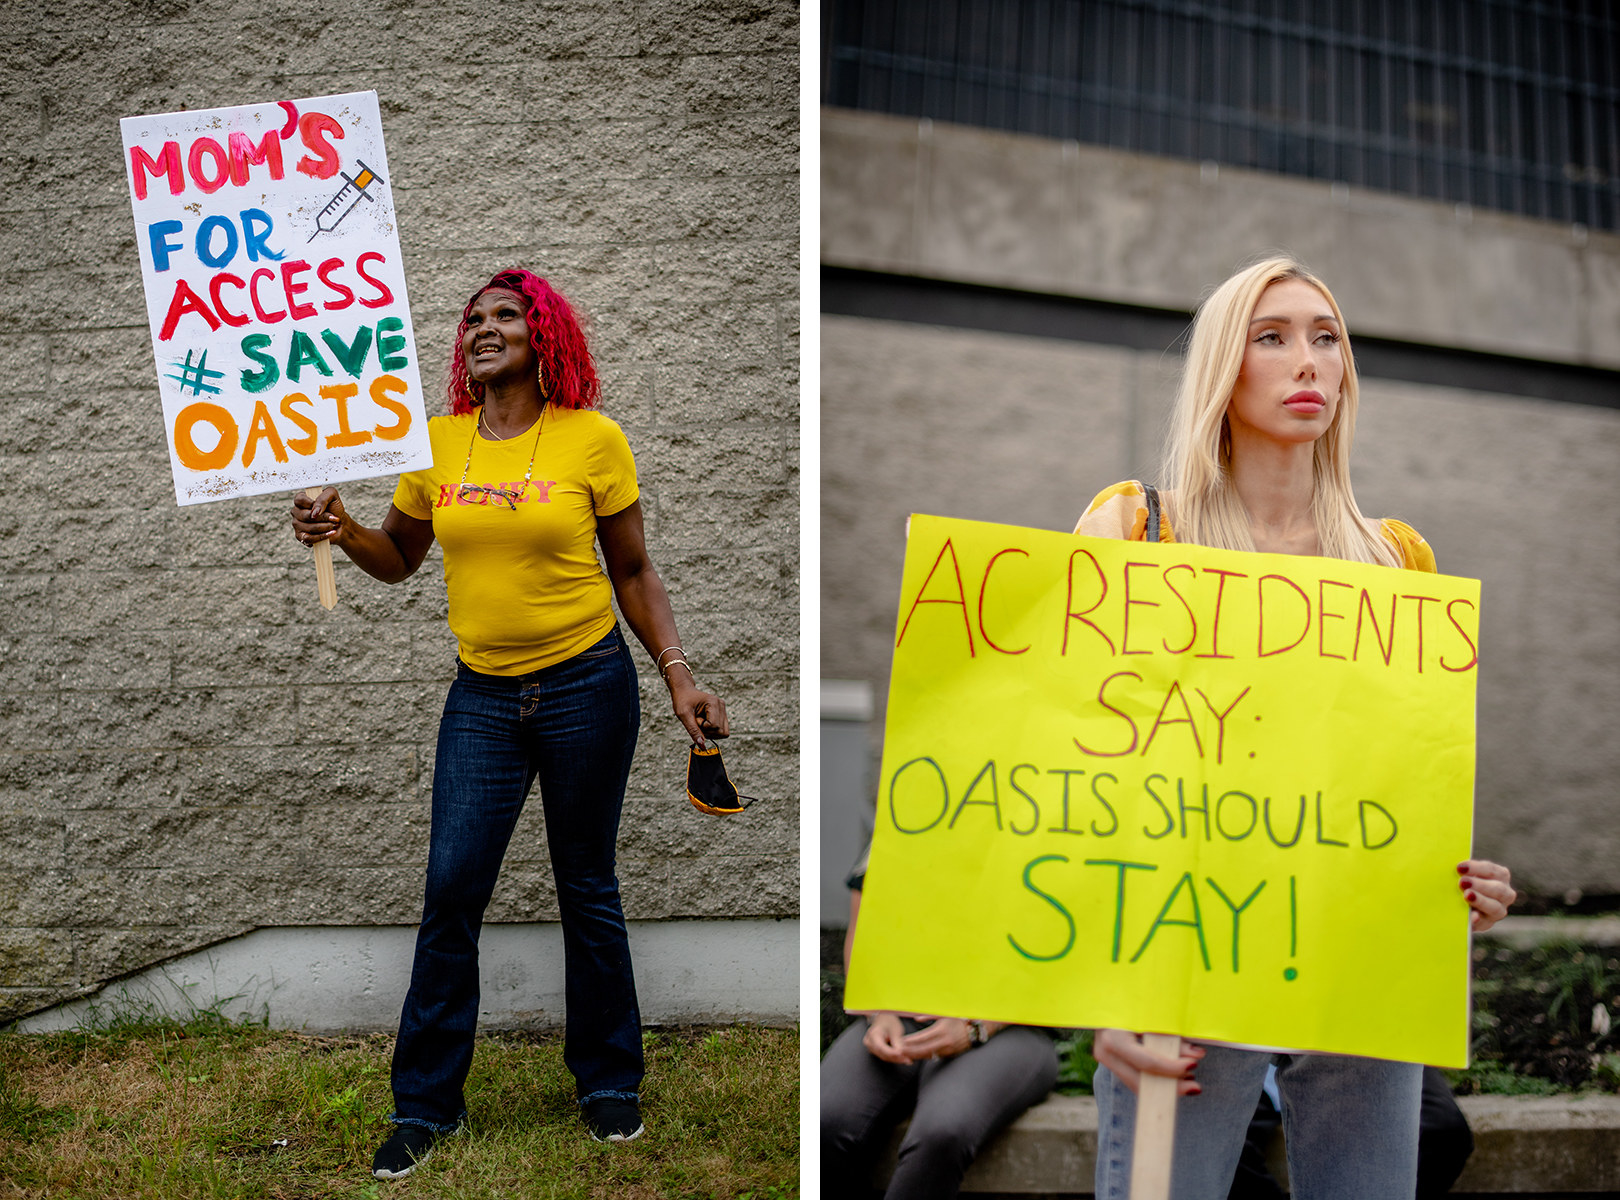 Left, a woman who holds a sign reading &quot;moms for access save oasis&quot;; right, a woman with a sign that reads &quot;AC residents say Oasis should stay&quot;